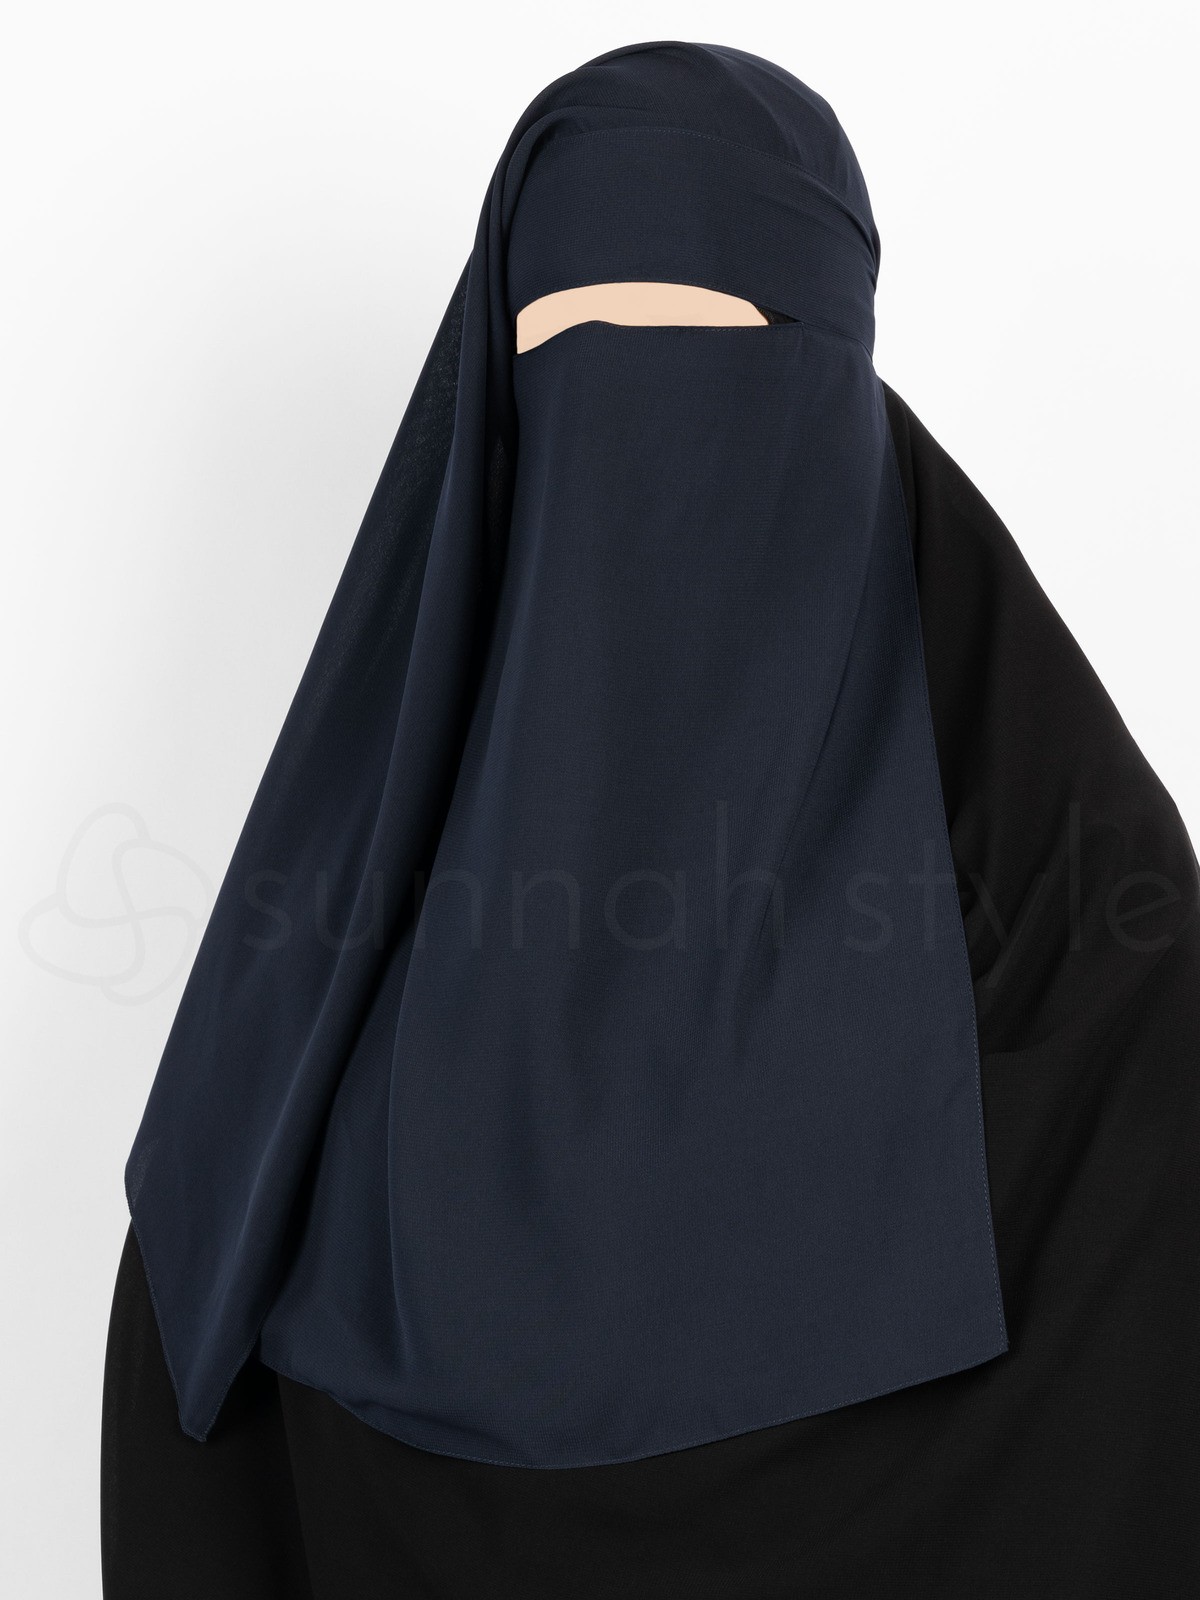 Sunnah Style - Two Layer Niqab (Navy Blue)